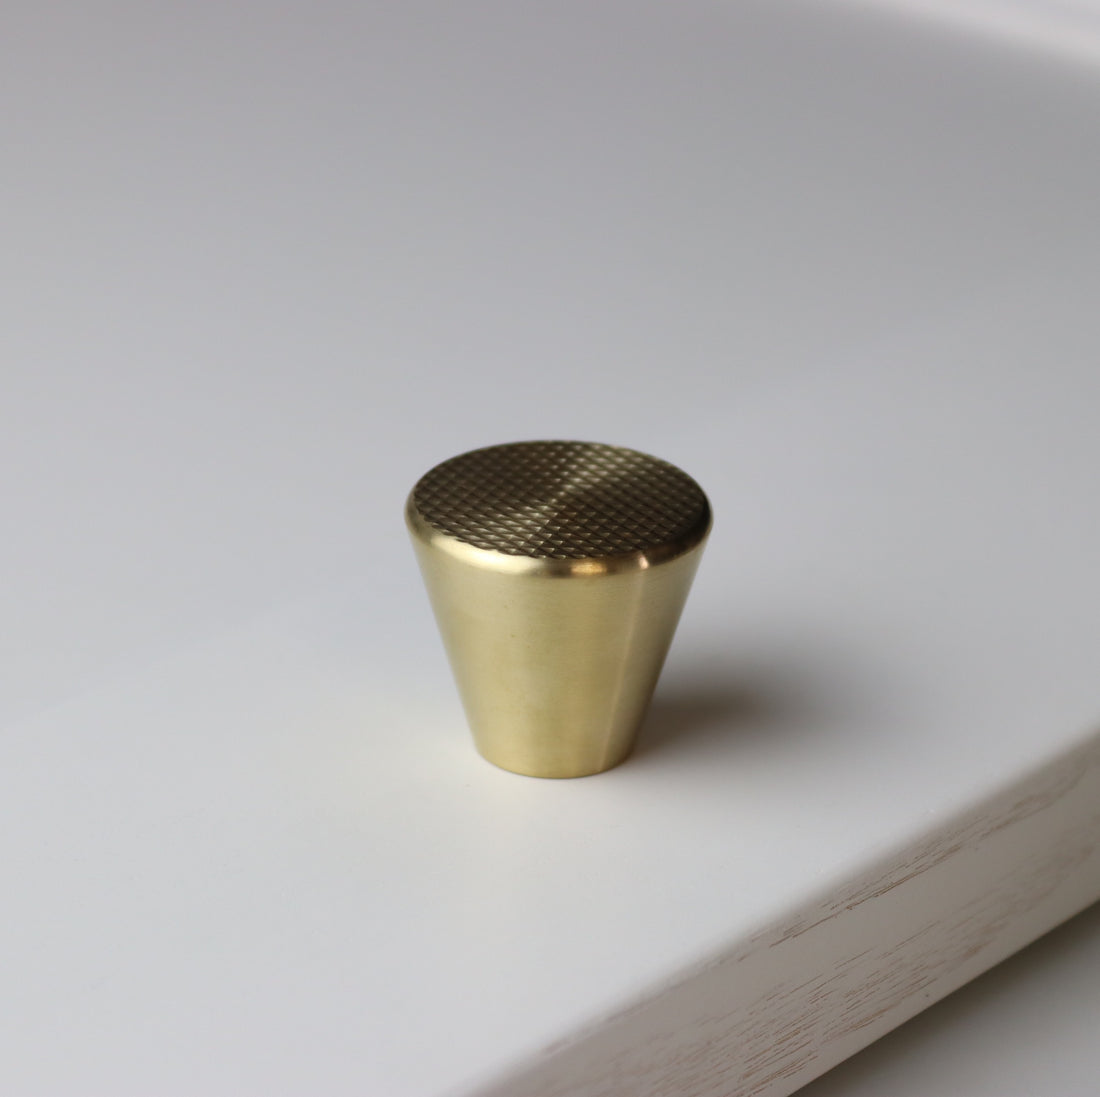 satin brass knurled pull knob for bedroom cabinetry